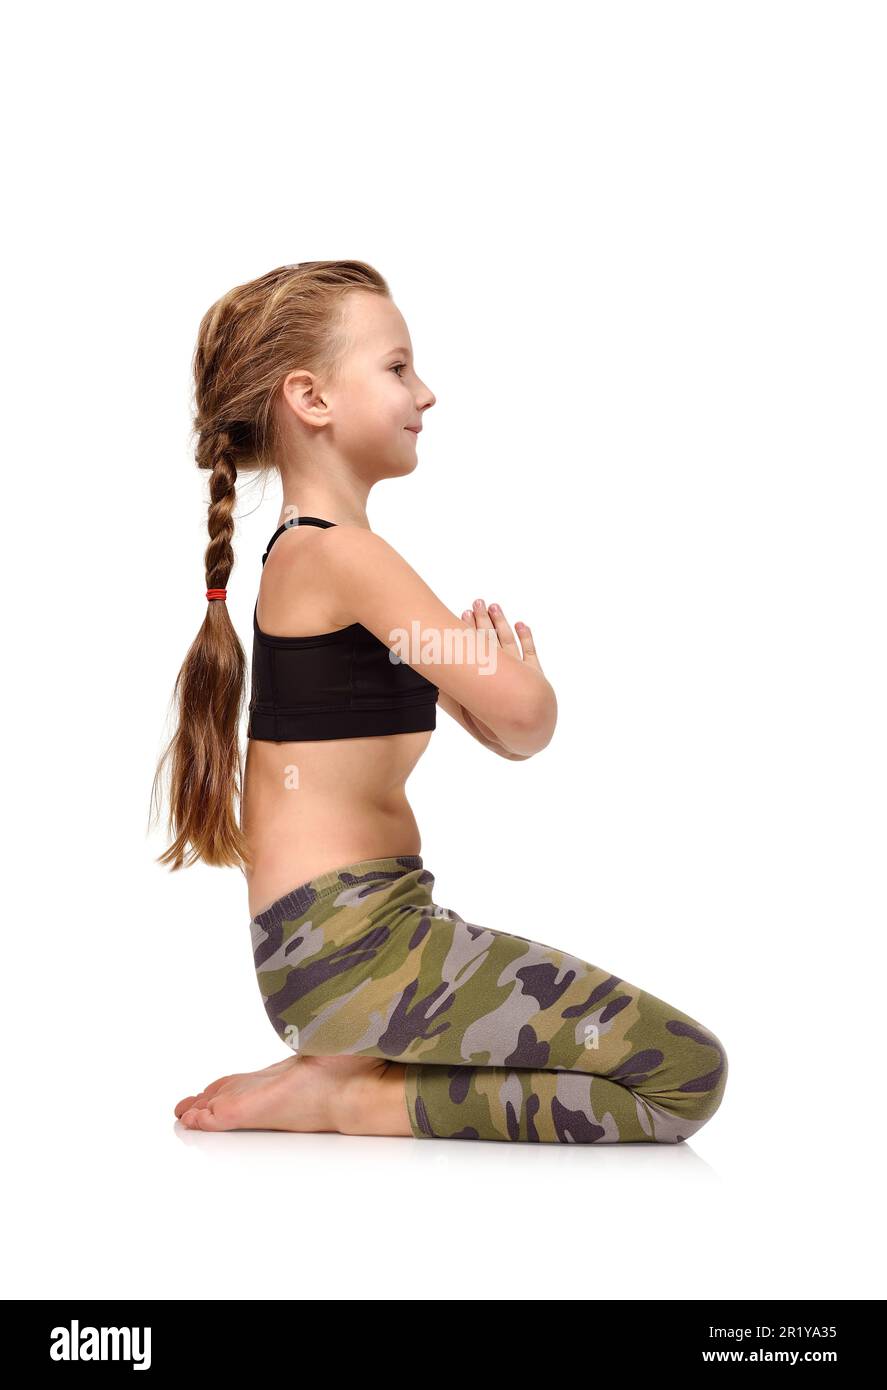 Little girl in camo clothing sitting lotus position on white background Stock Photo